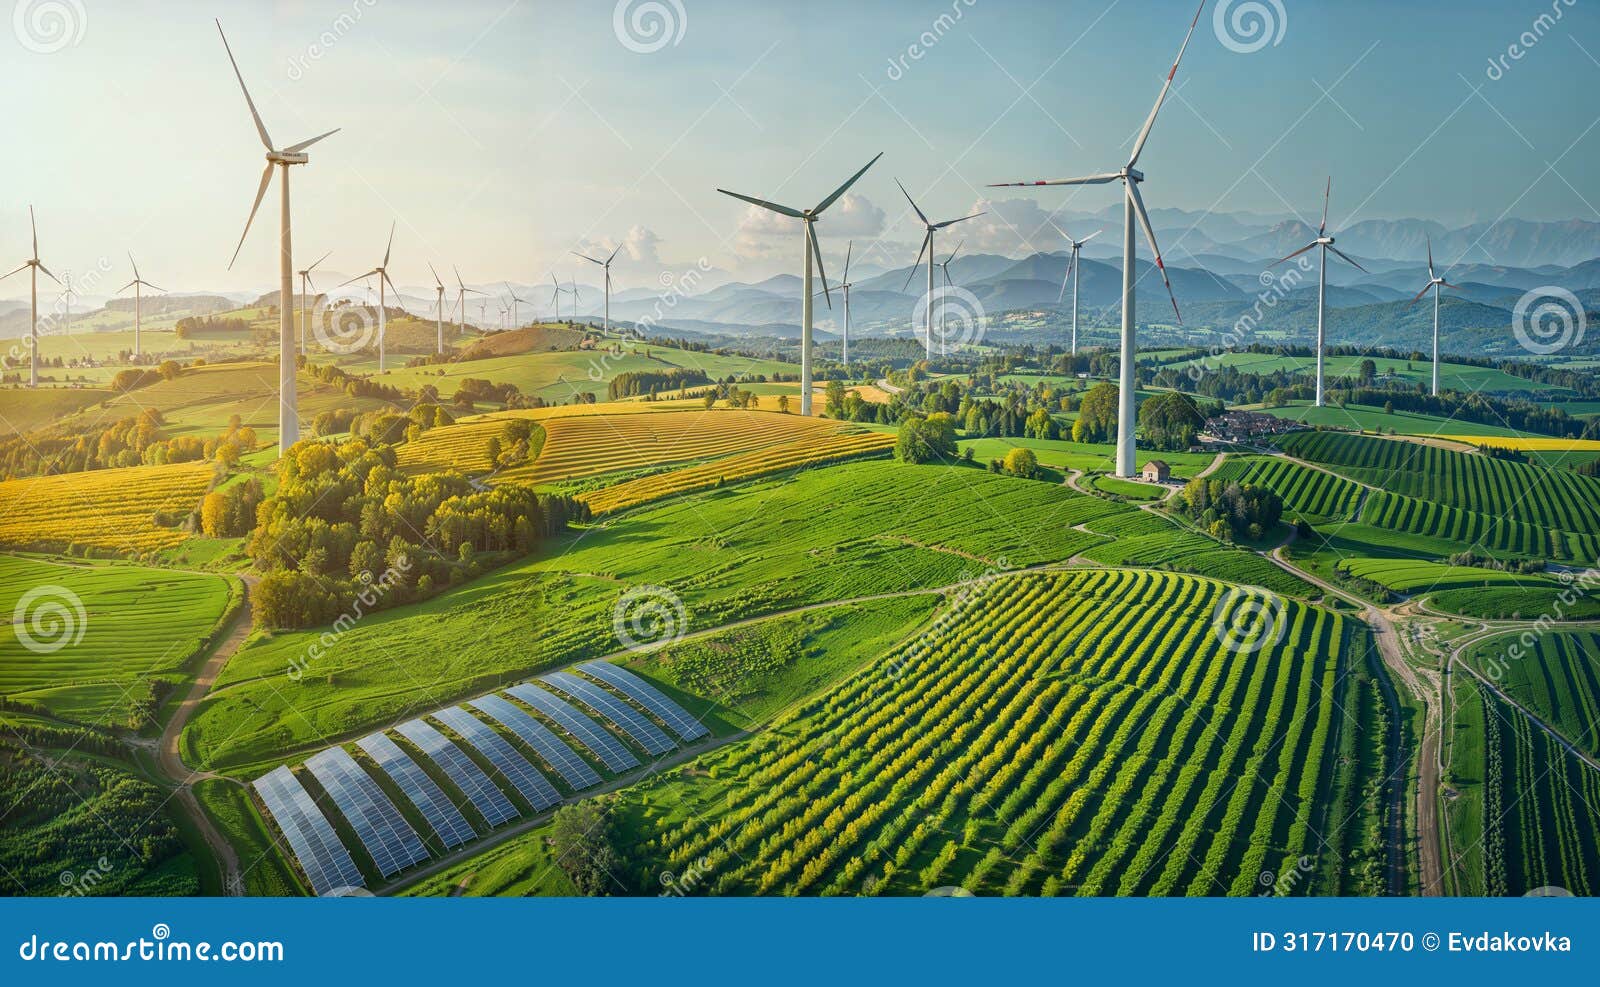 an aerial view of a farm with wind turbines generating renewable energy on a sunny day.